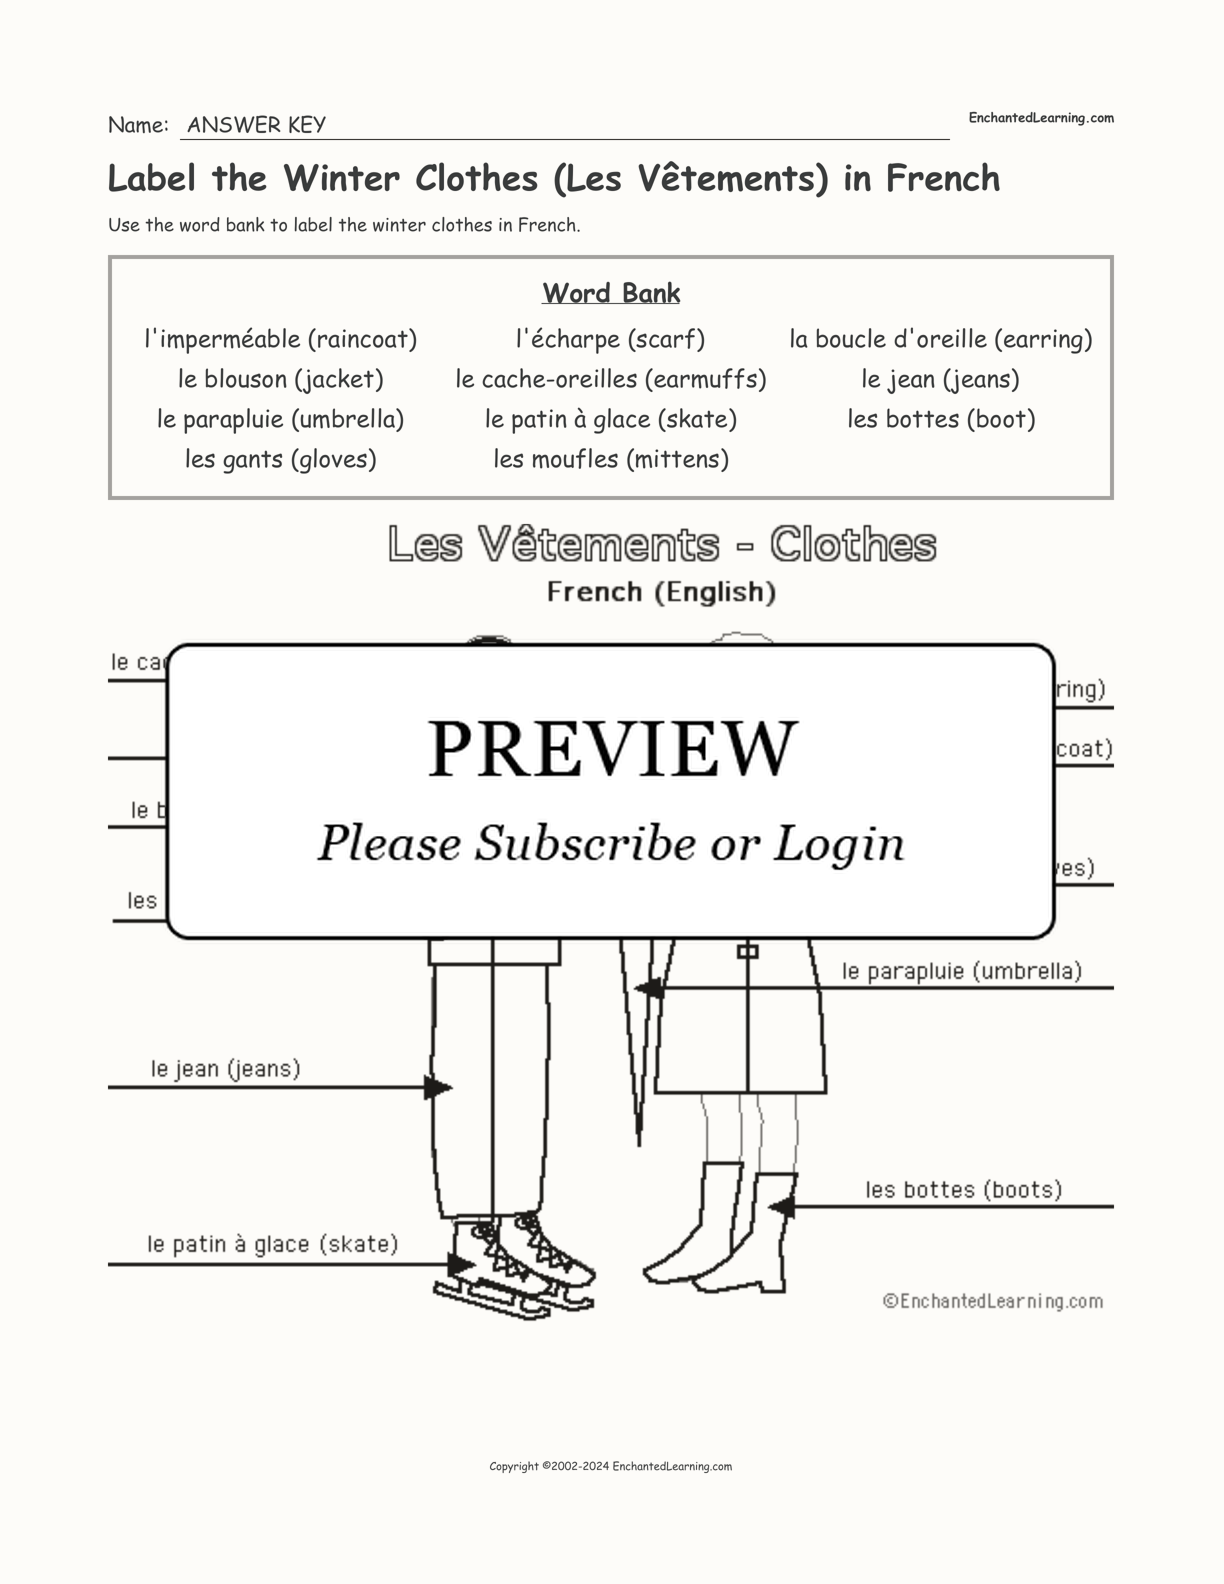 Label the Winter Clothes (Les Vêtements) in French interactive worksheet page 2